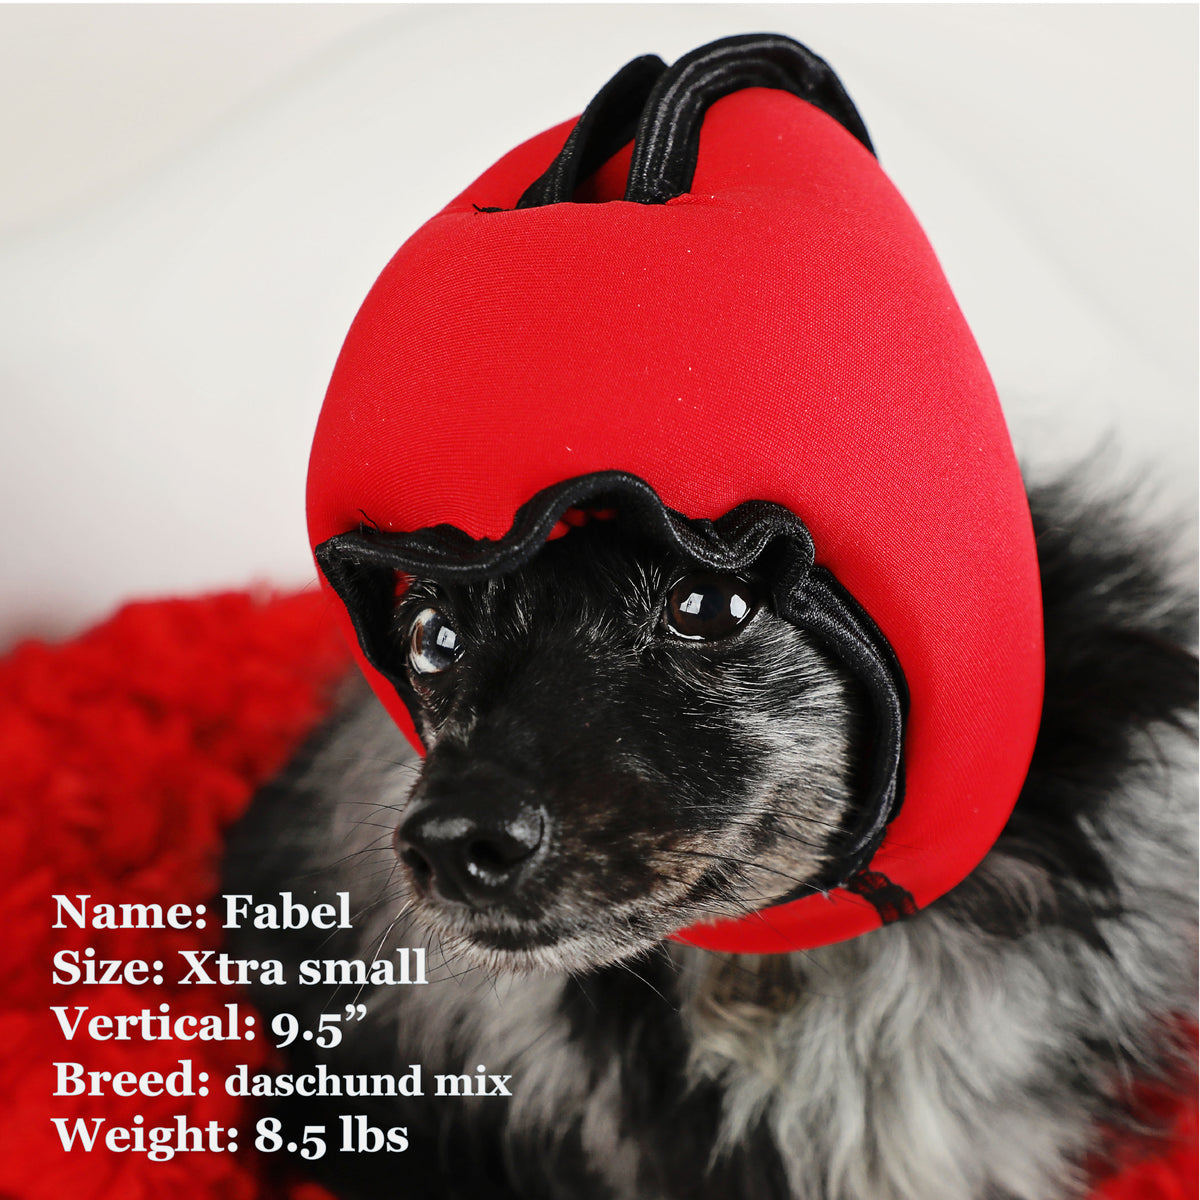 Fable is a Daschund Mix in a Xtra Small Red PAWNIX Noise Cancelling Headset for dogs